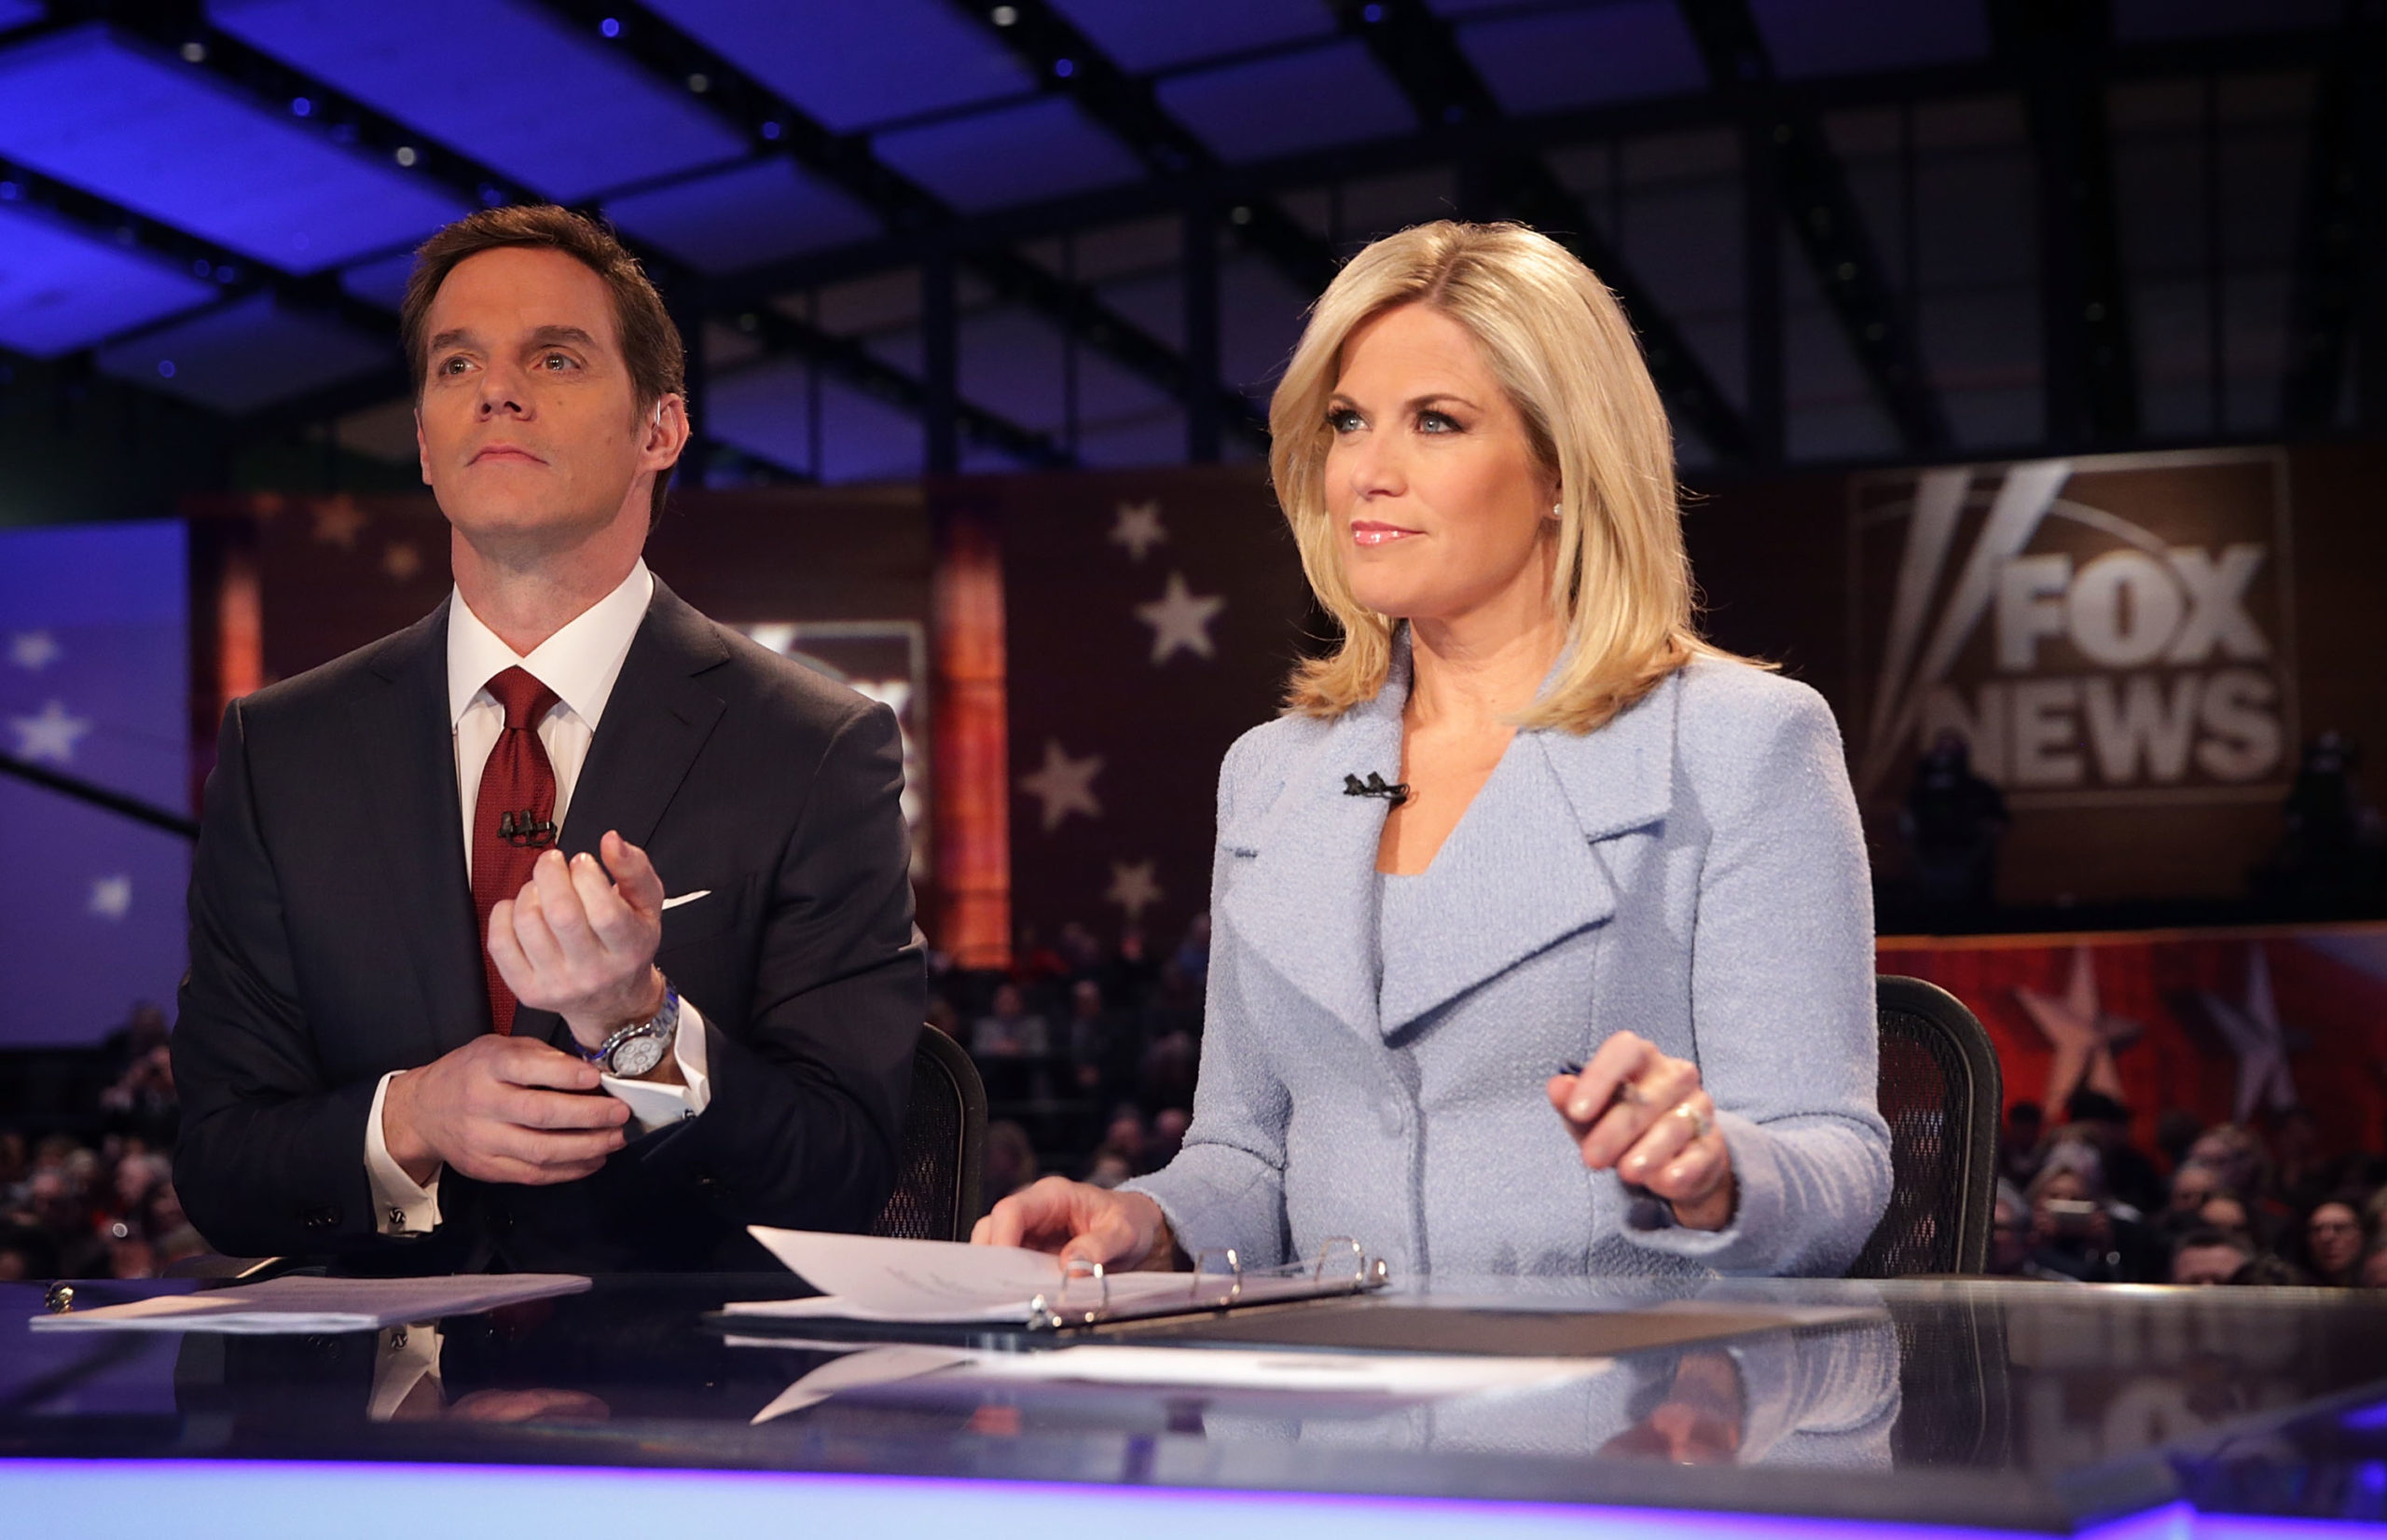 Moderators Martha MacCallum (R) and Bill Hemmer (L) wait for the beginning of the first forum of the Fox News - Google GOP Debate January 28, 2016 at the Iowa Events Center in Des Moines, Iowa. (Alex Wong/Getty Images)